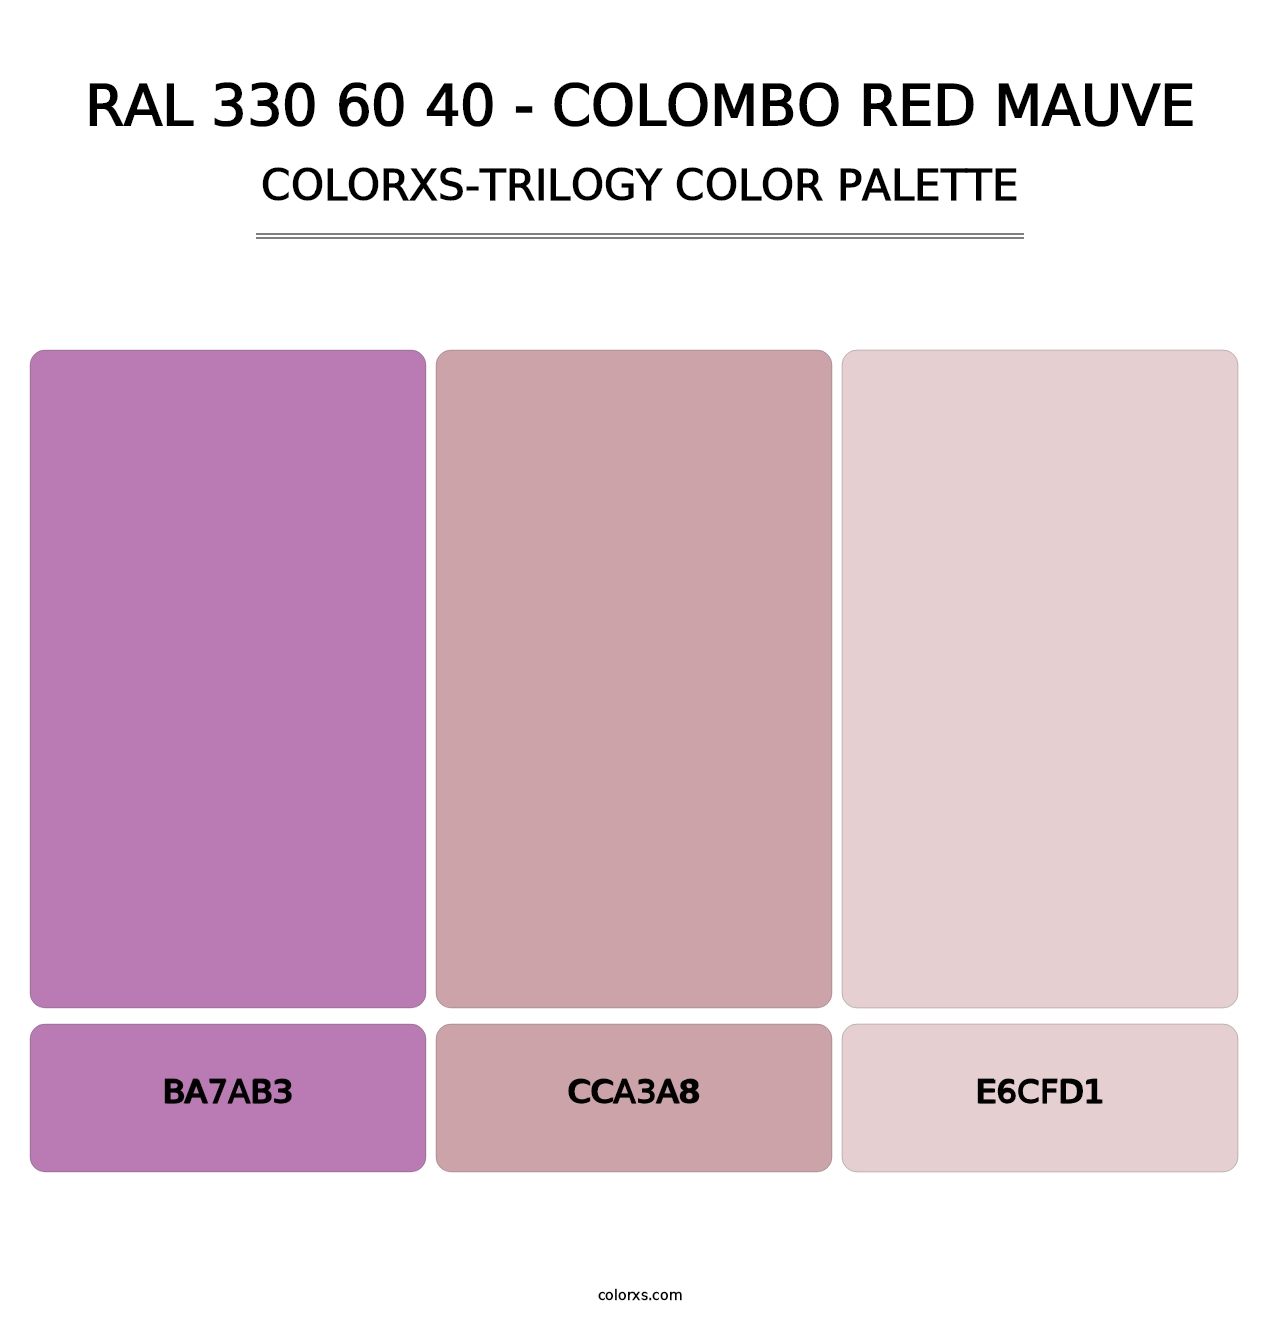 RAL 330 60 40 - Colombo Red Mauve - Colorxs Trilogy Palette